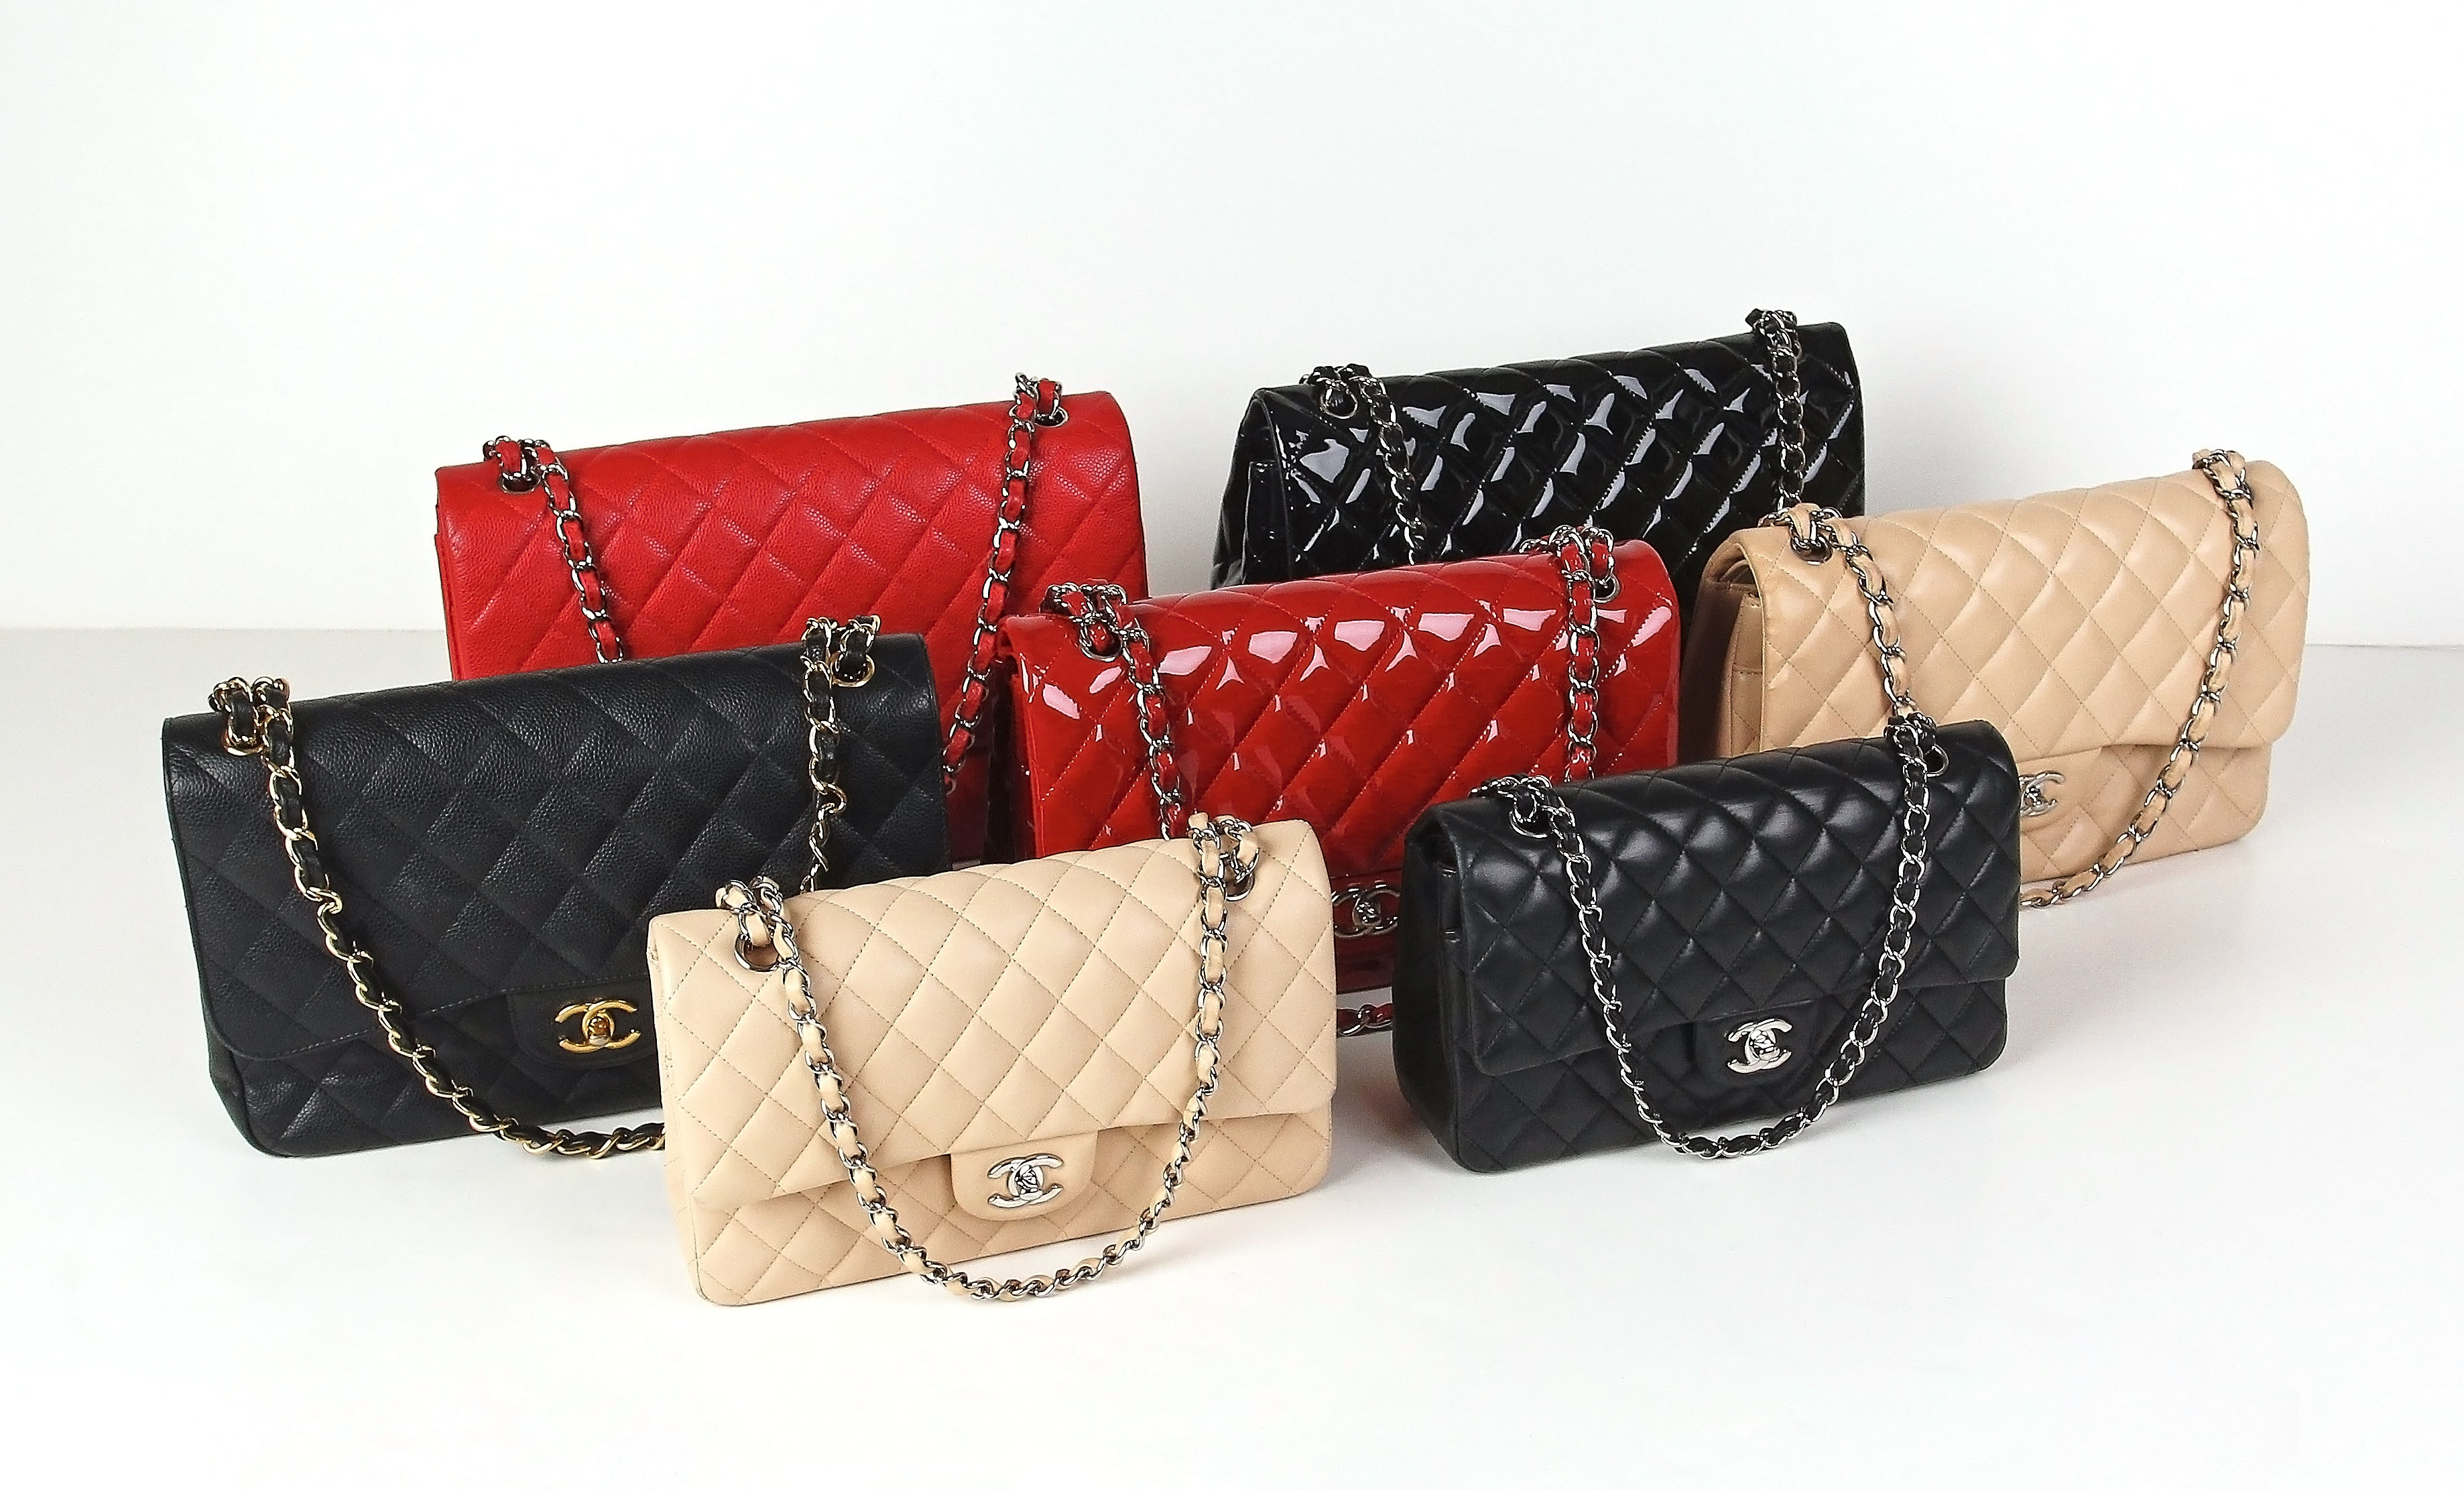 Chanel Classic Flap Bag Collection | YoogisCloset.com